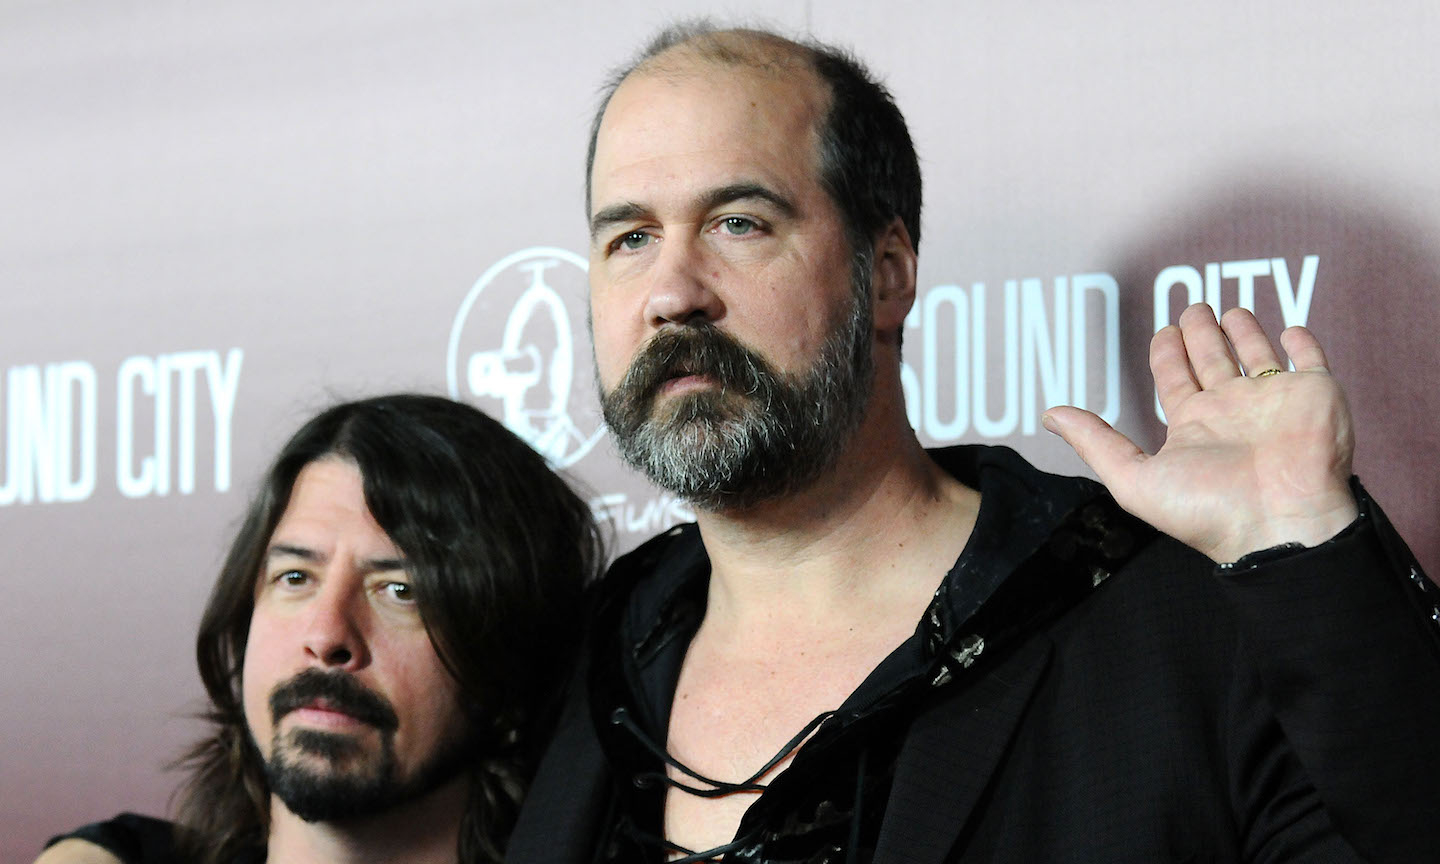 Dave Grohl, Krist Novoselic, And Steve Albini Discuss Nirvana And 30 Years Of ‘In Utero’ On ‘Conan’ Podcast